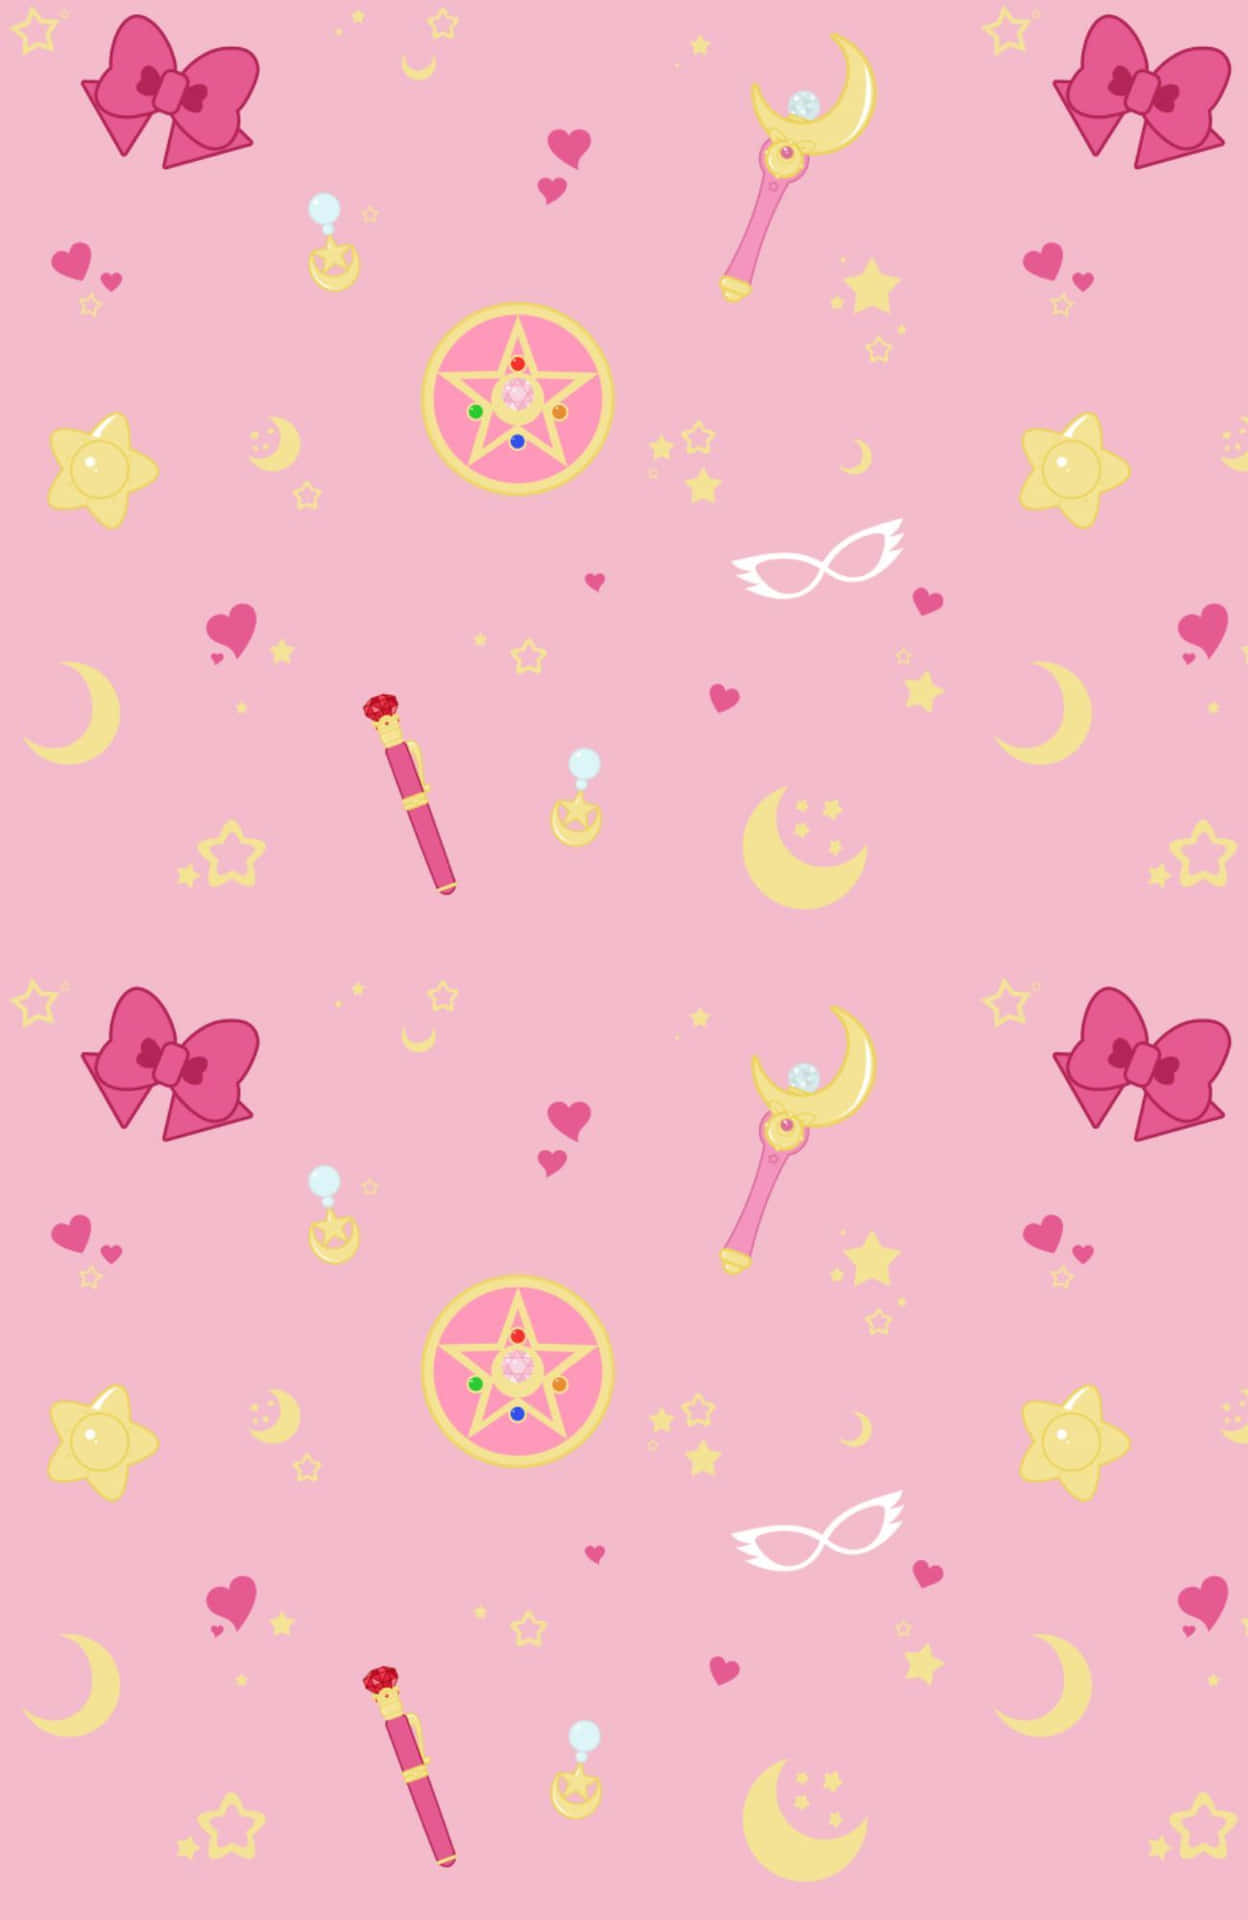 Sailor Moon Pattern In Her Many Big and Small Adventures Wallpaper